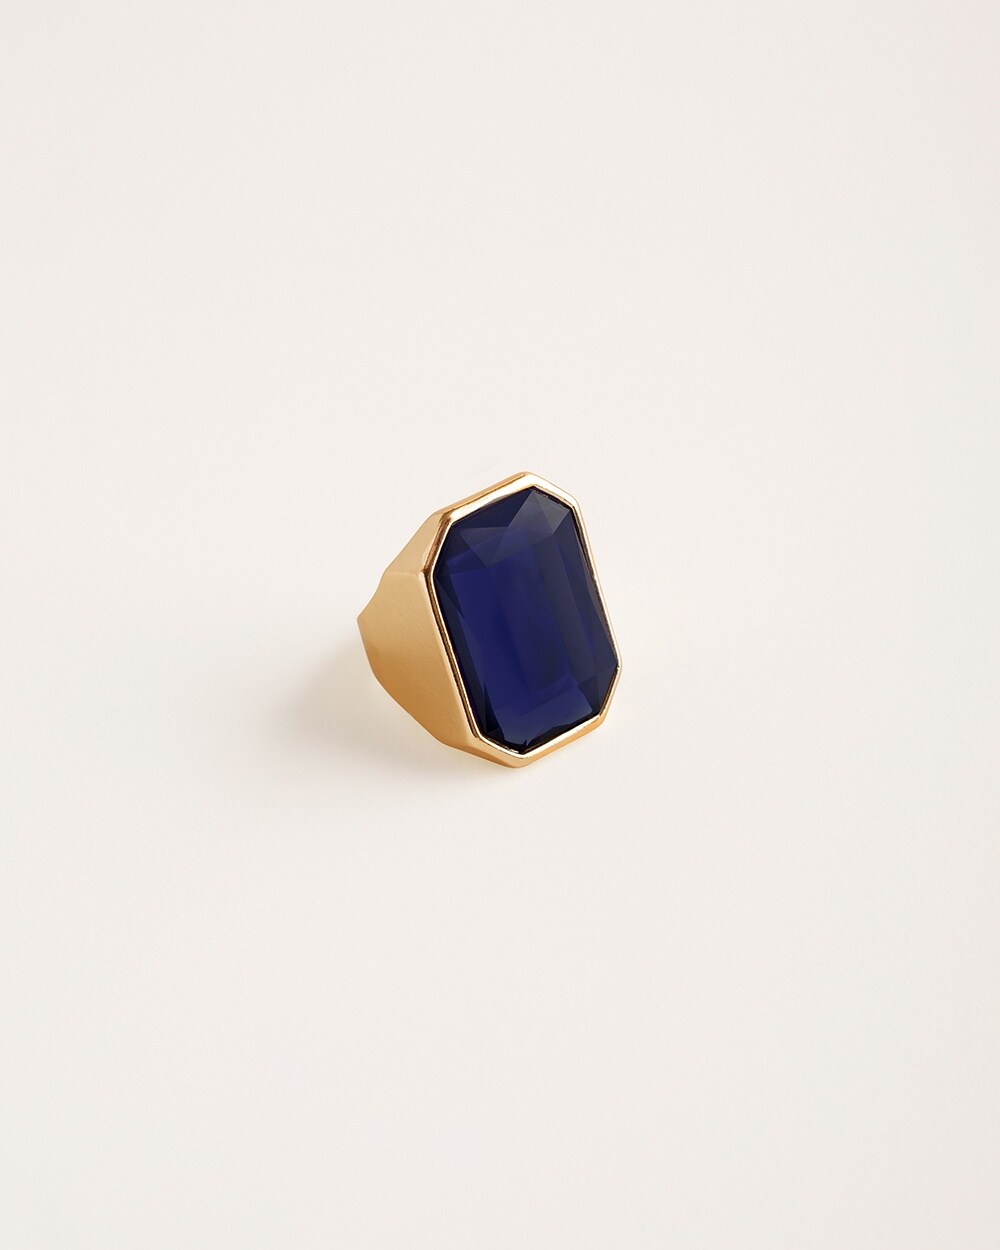 Goldtone Cocktail Ring with Blue Stone